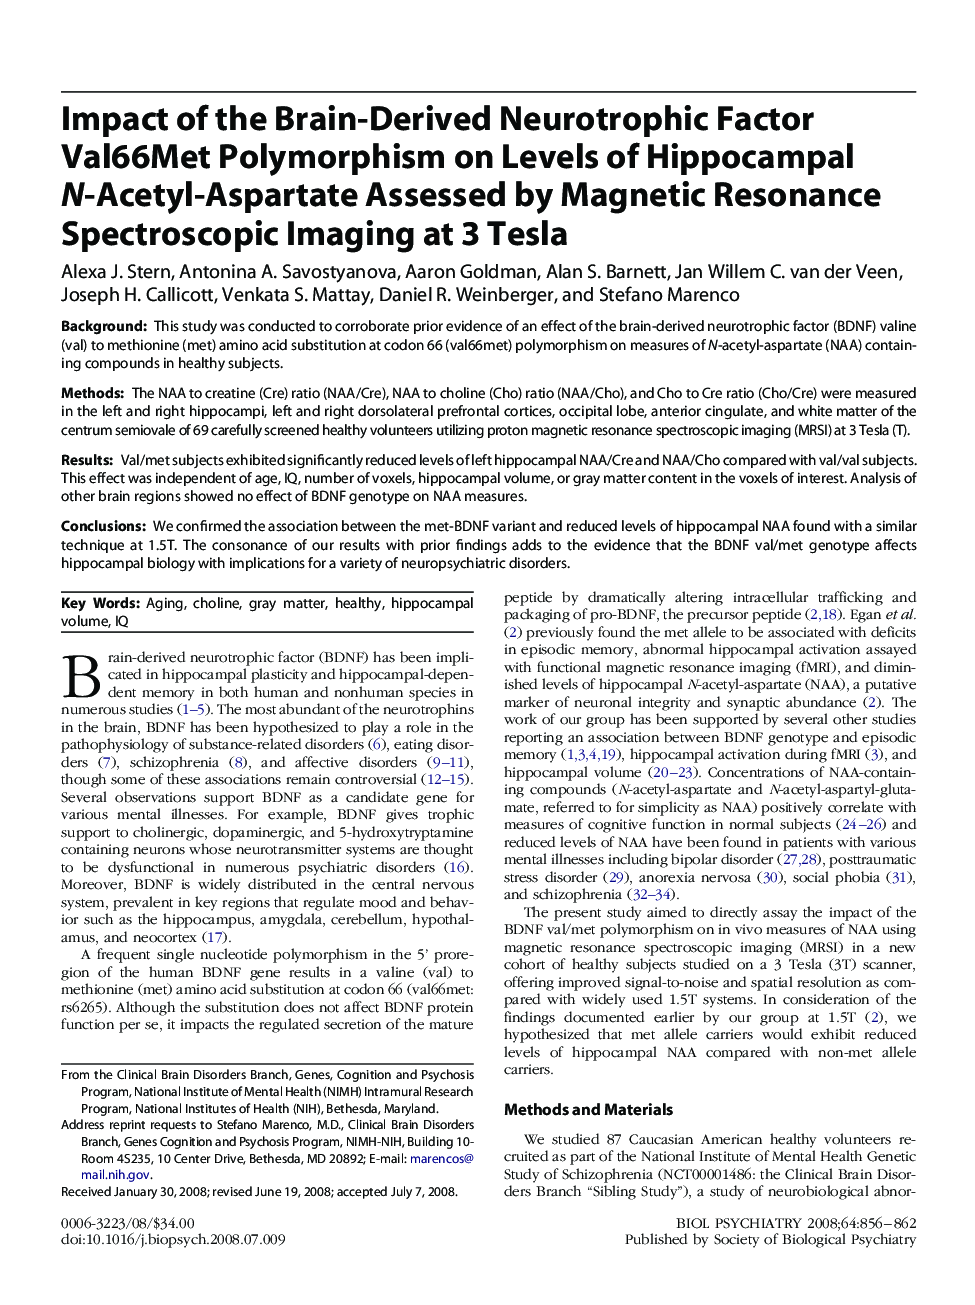 Impact of the Brain-Derived Neurotrophic Factor Val66Met Polymorphism on Levels of Hippocampal N-Acetyl-Aspartate Assessed by Magnetic Resonance Spectroscopic Imaging at 3 Tesla